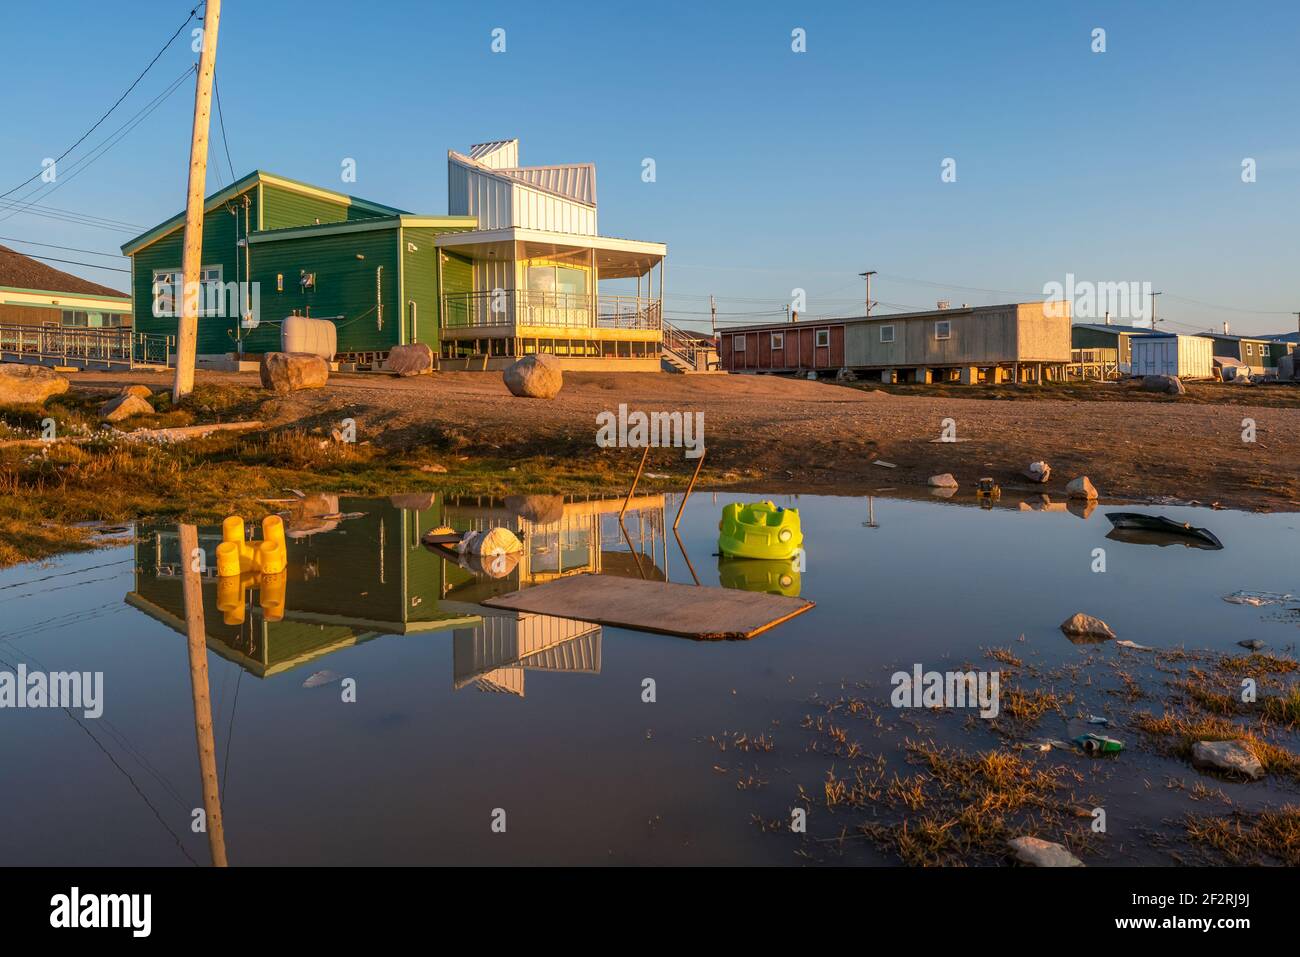 Golden hour in Inuit community of Qikiqtarjuaq, Broughton Island, Nunavut, Canada. Parks Canada building reflection on water surface. Settlement in Stock Photo